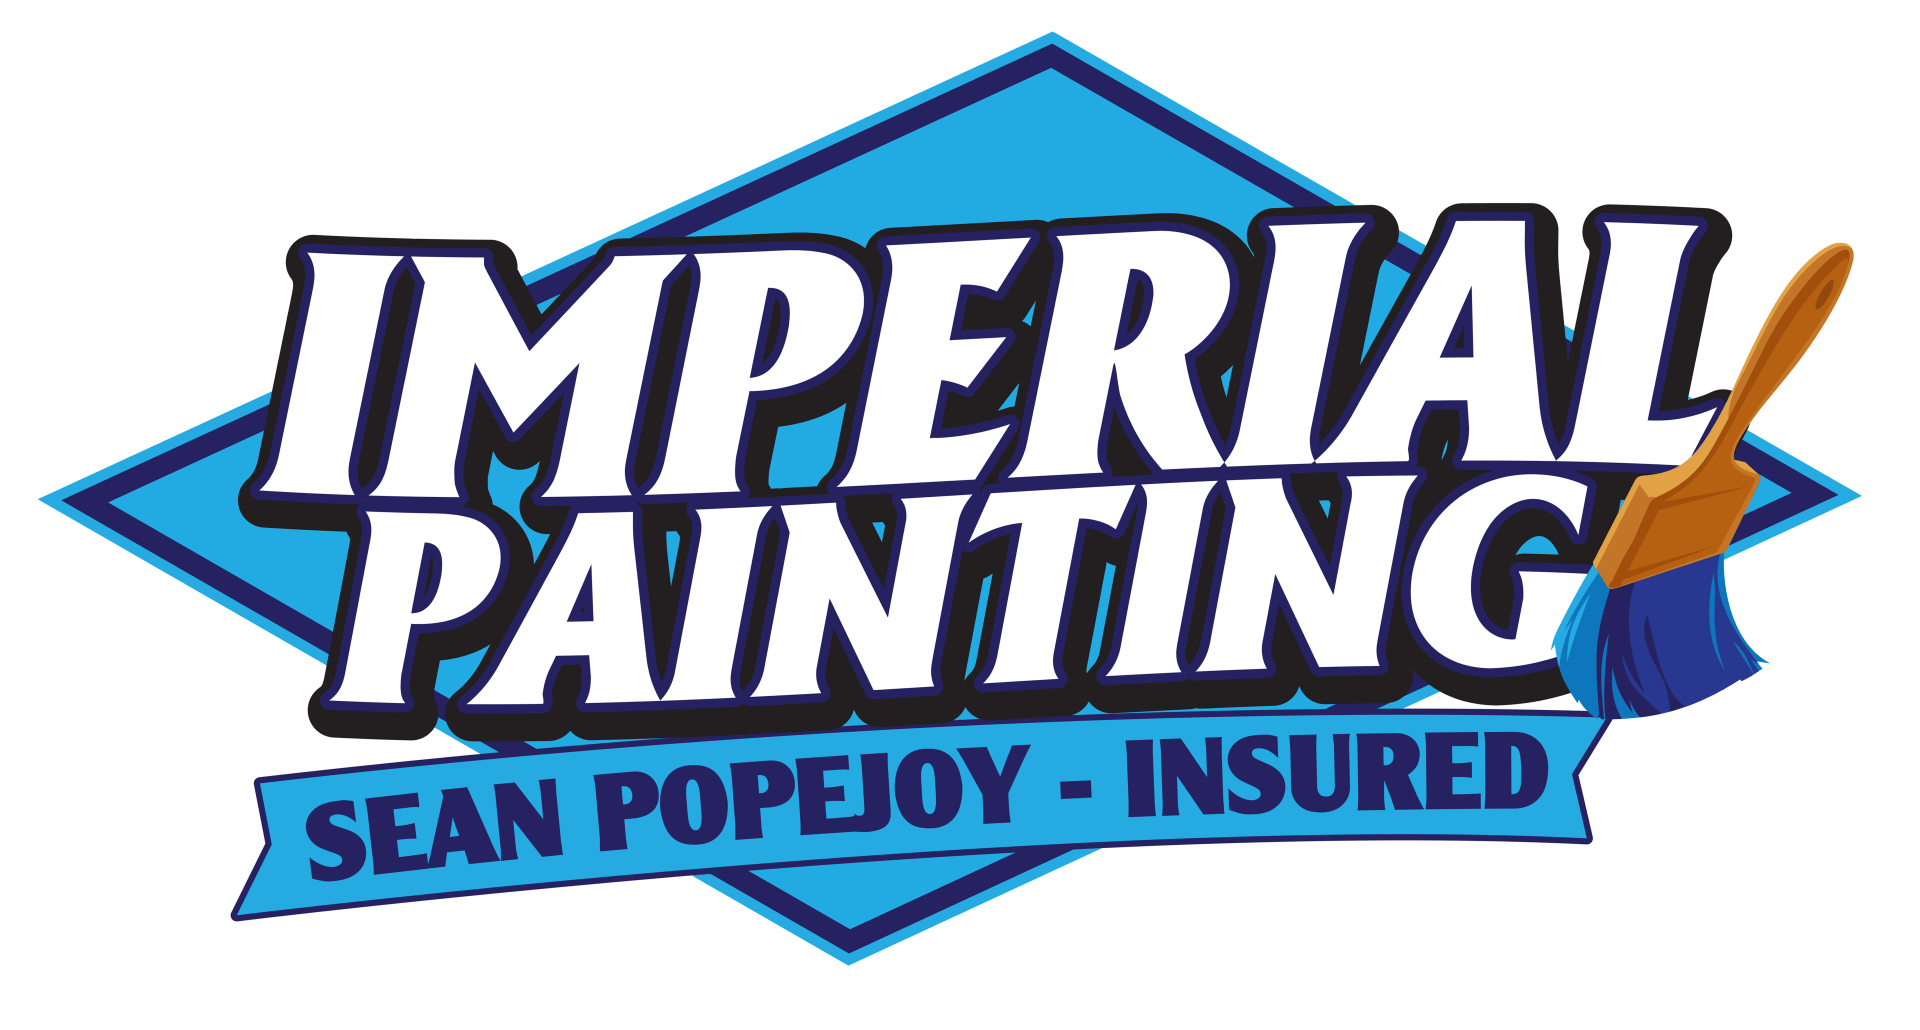 Logo for Imperial Painting in Little Rock